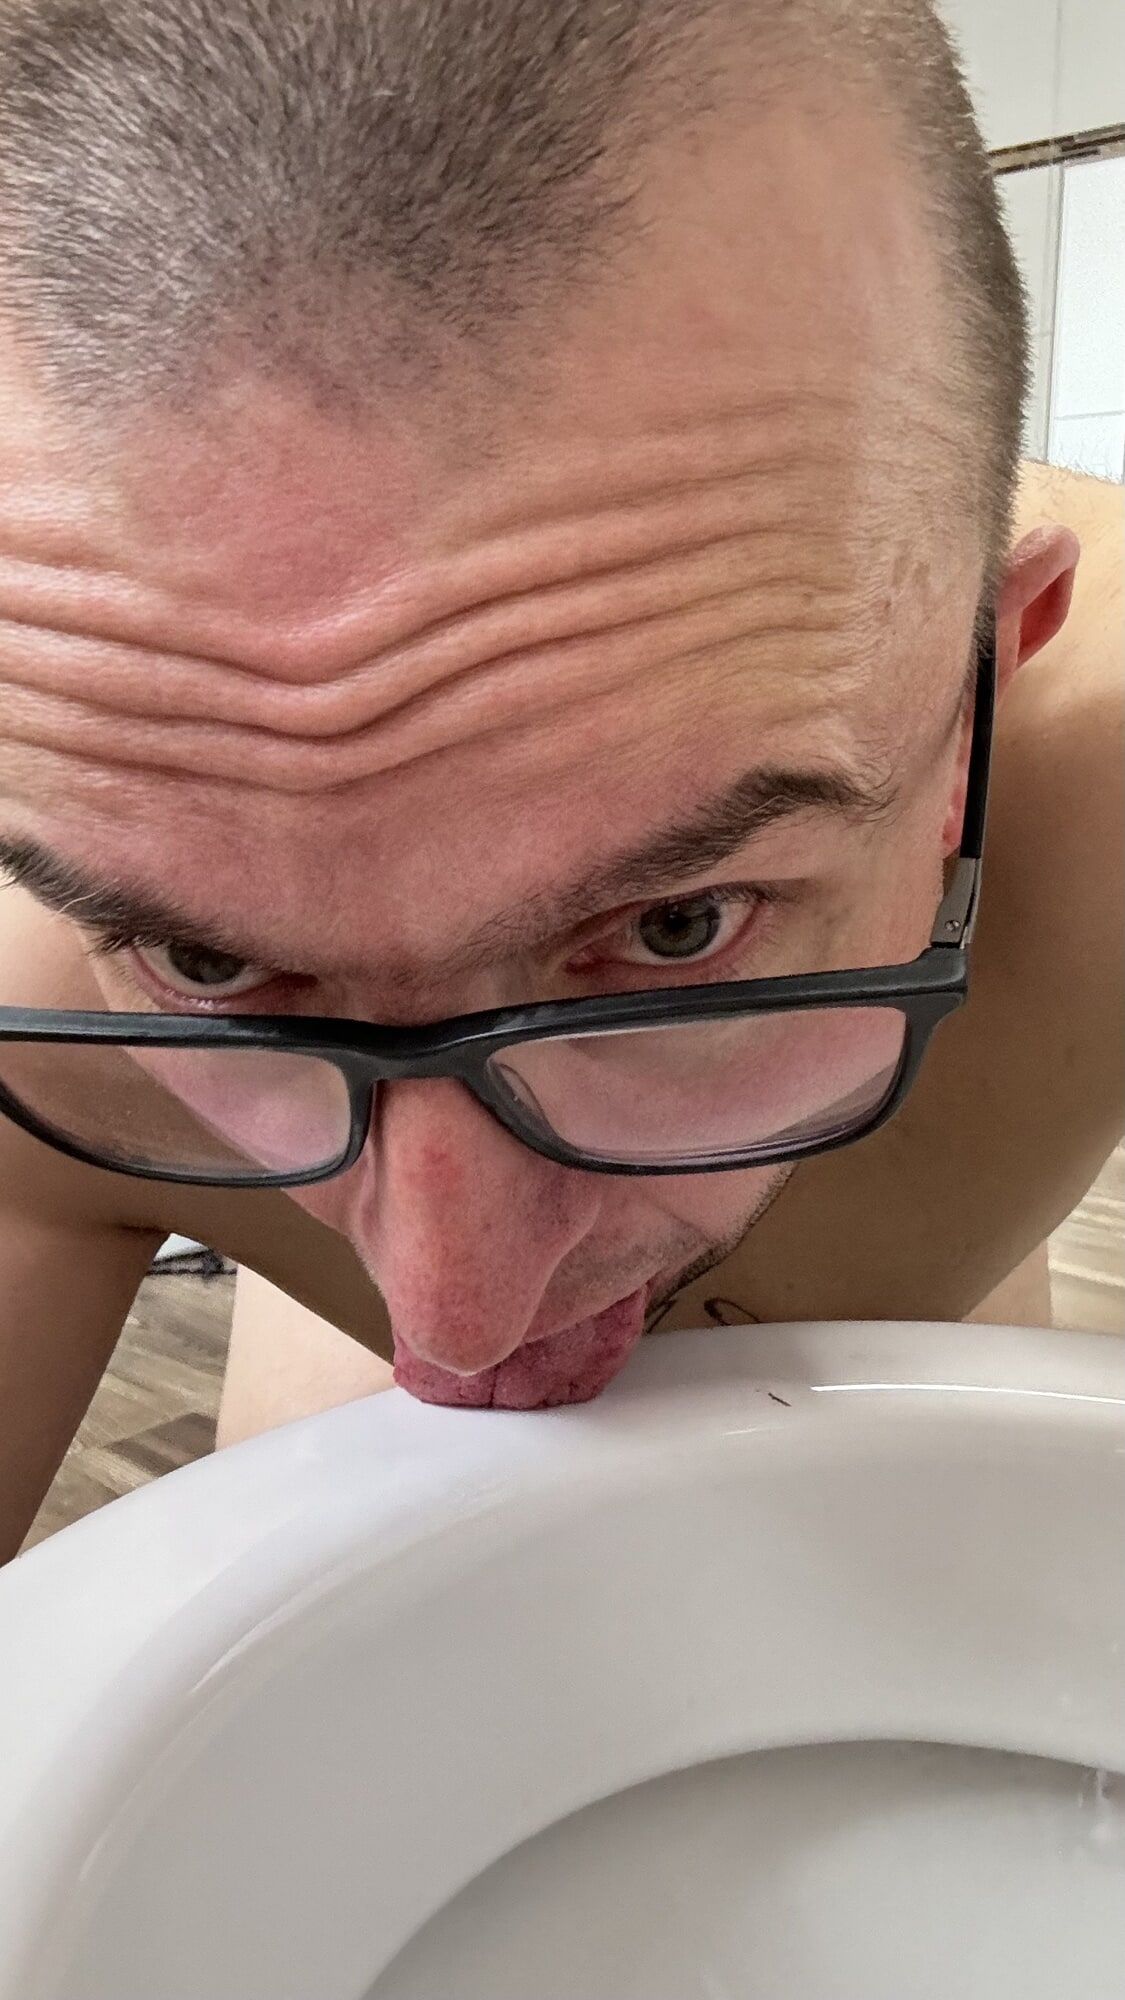 Slave pig has to clean toilet with his tongue #2